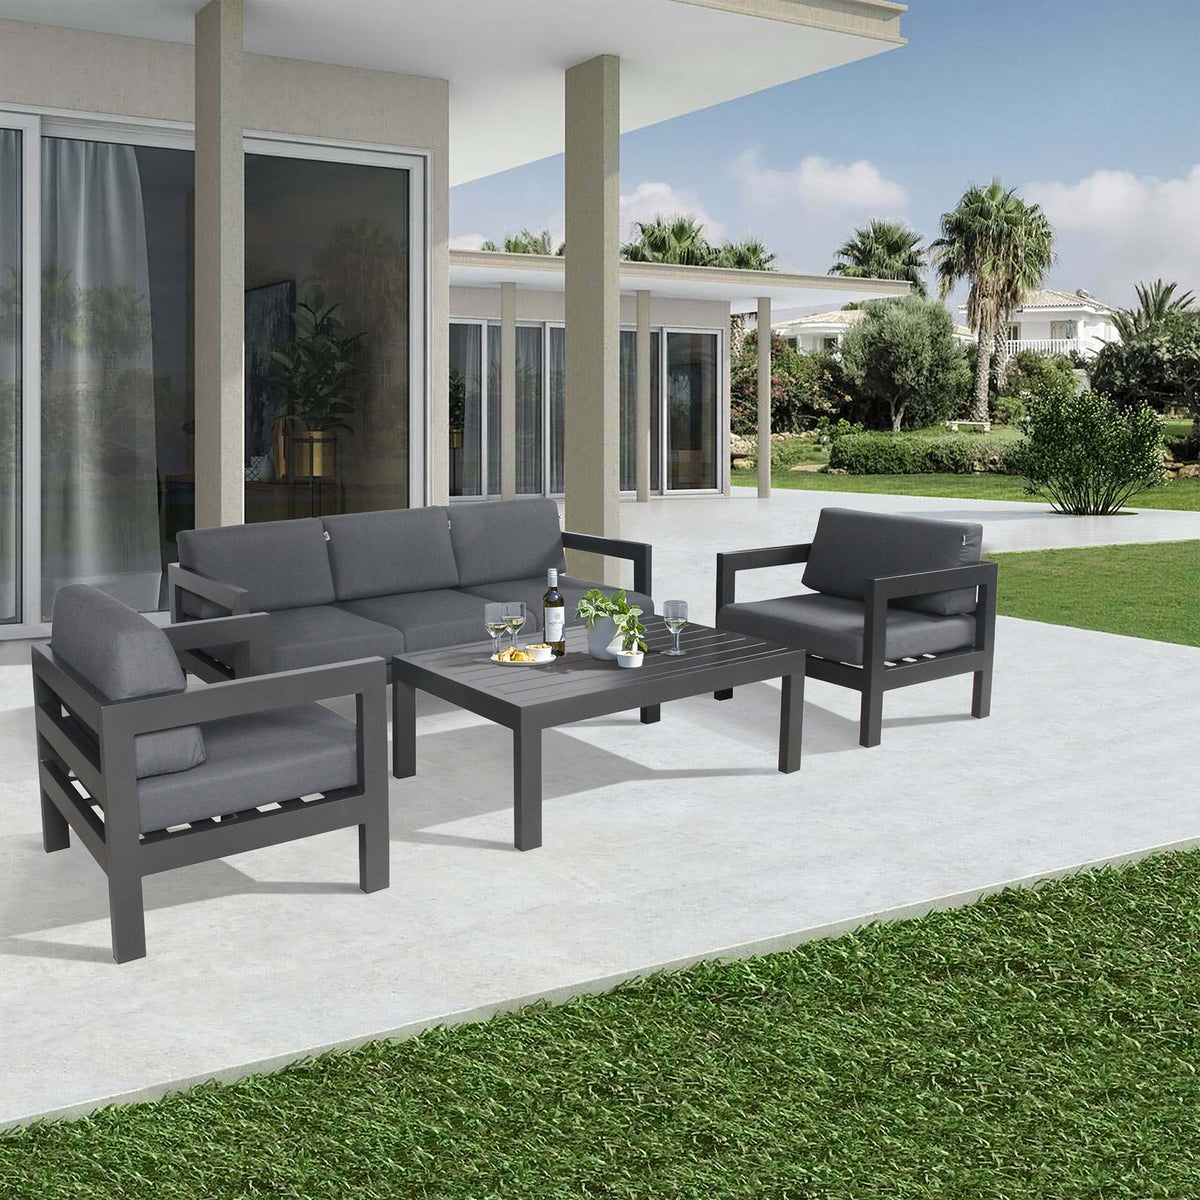 Outie 133cm Outdoor Coffee Table Charcoal 